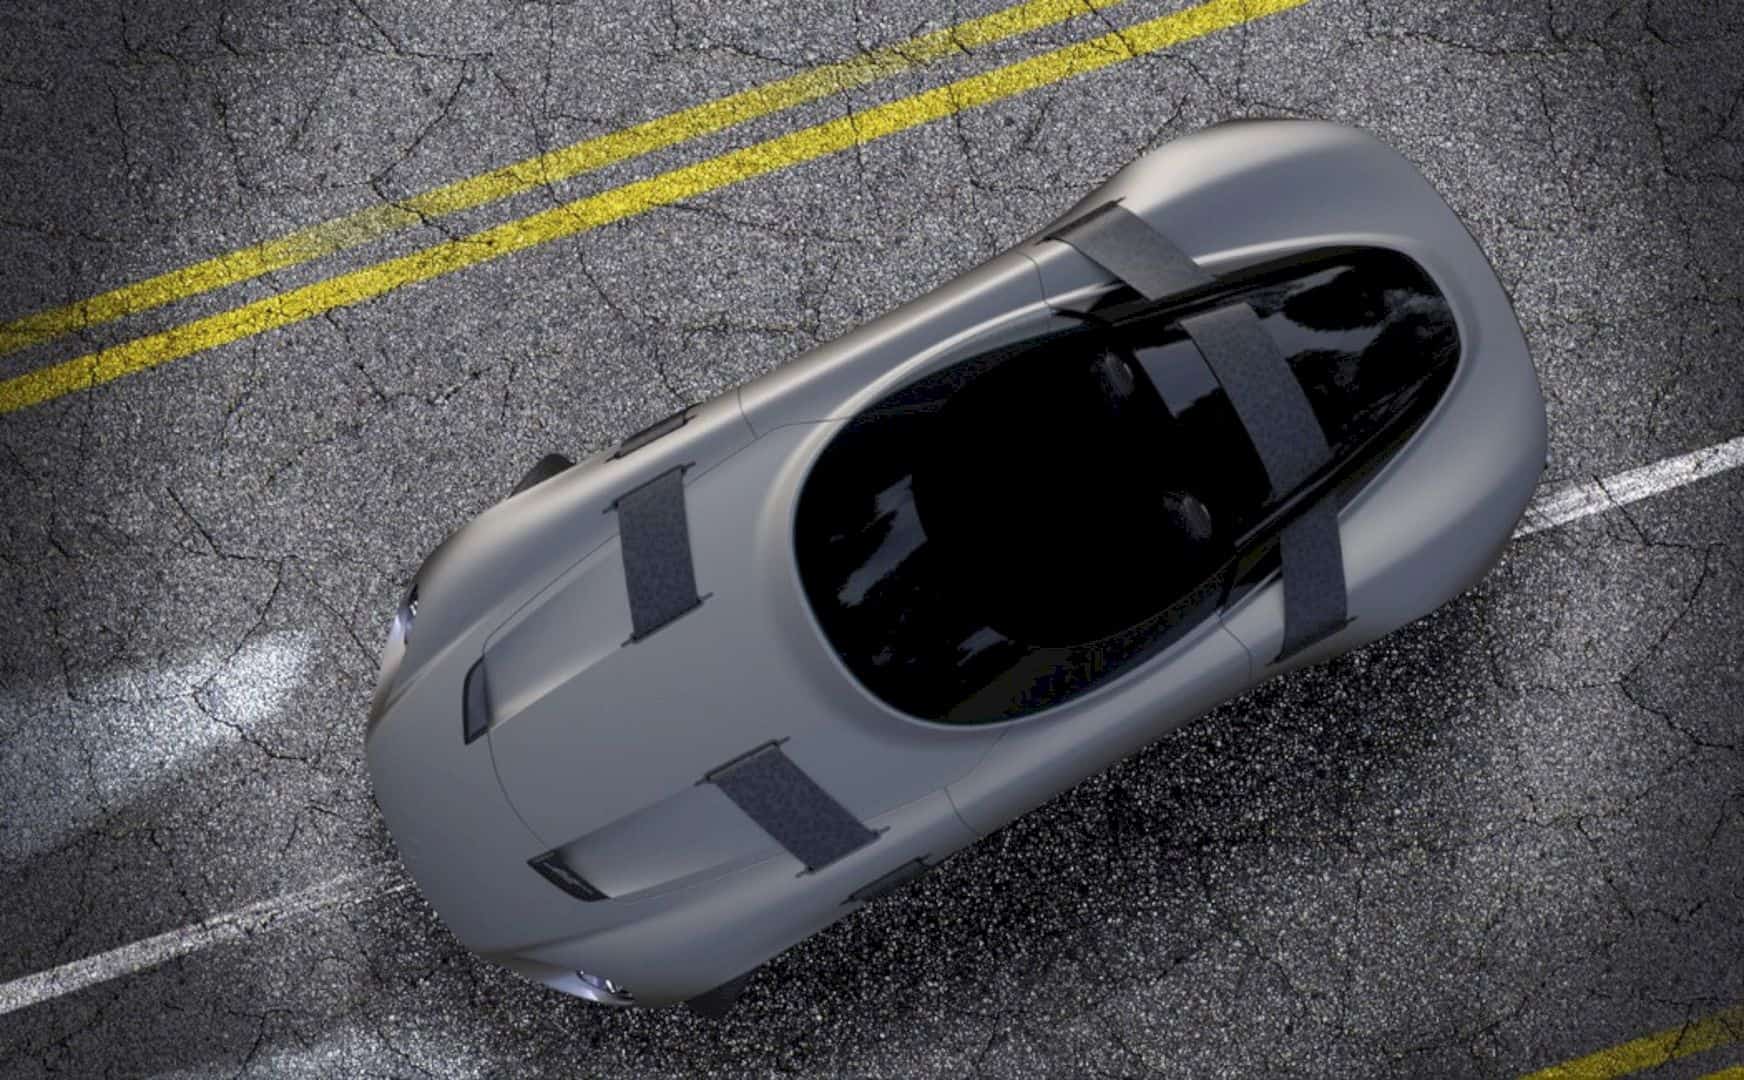 The Roadster Mg Concept Design 1